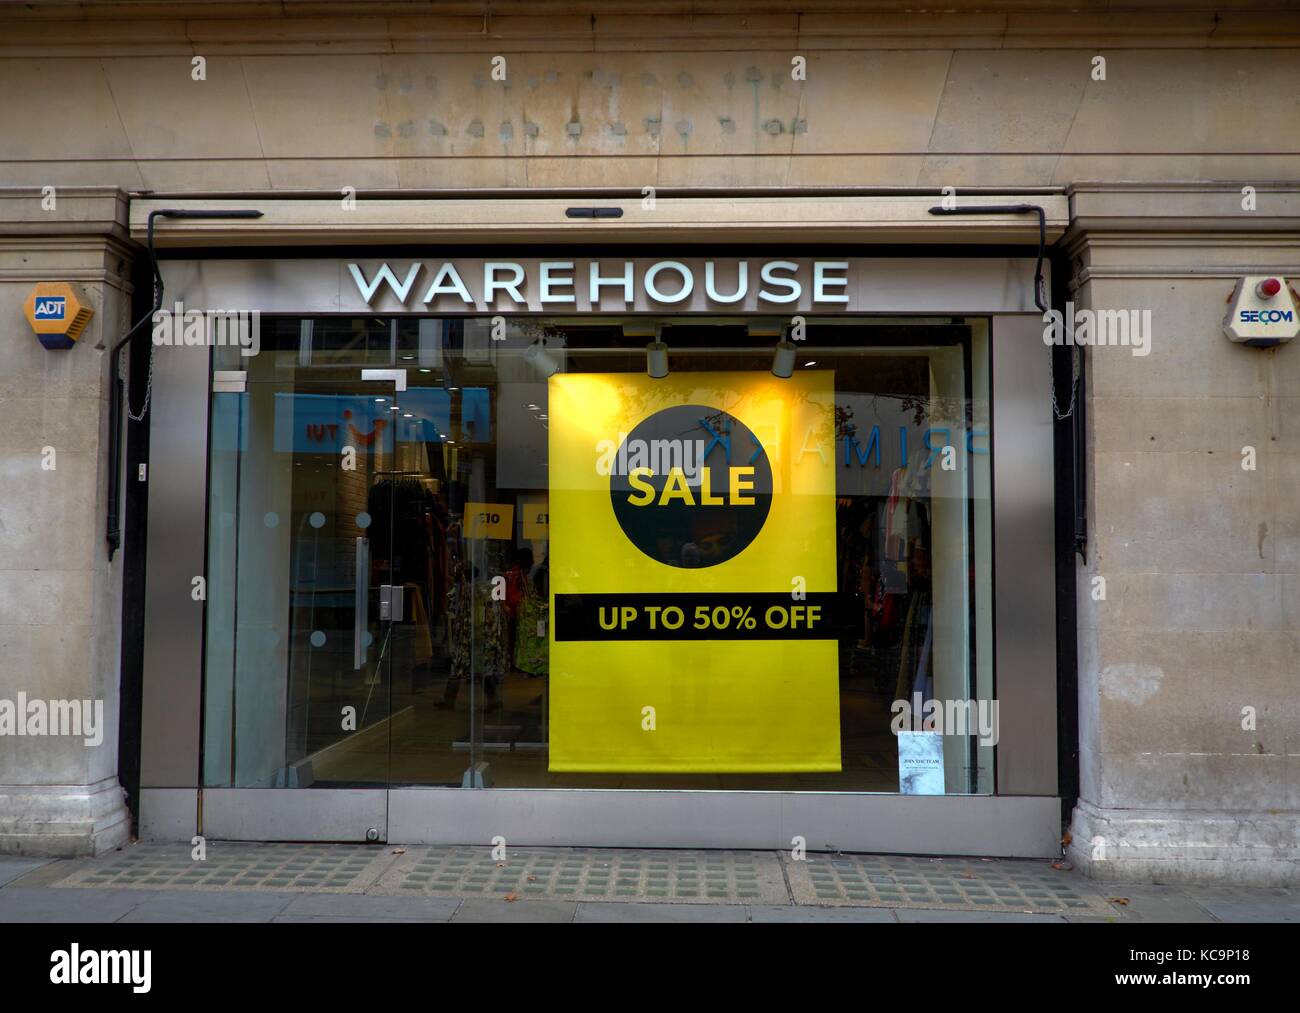 warehouse sale up to 50% off window poster Stock Photo